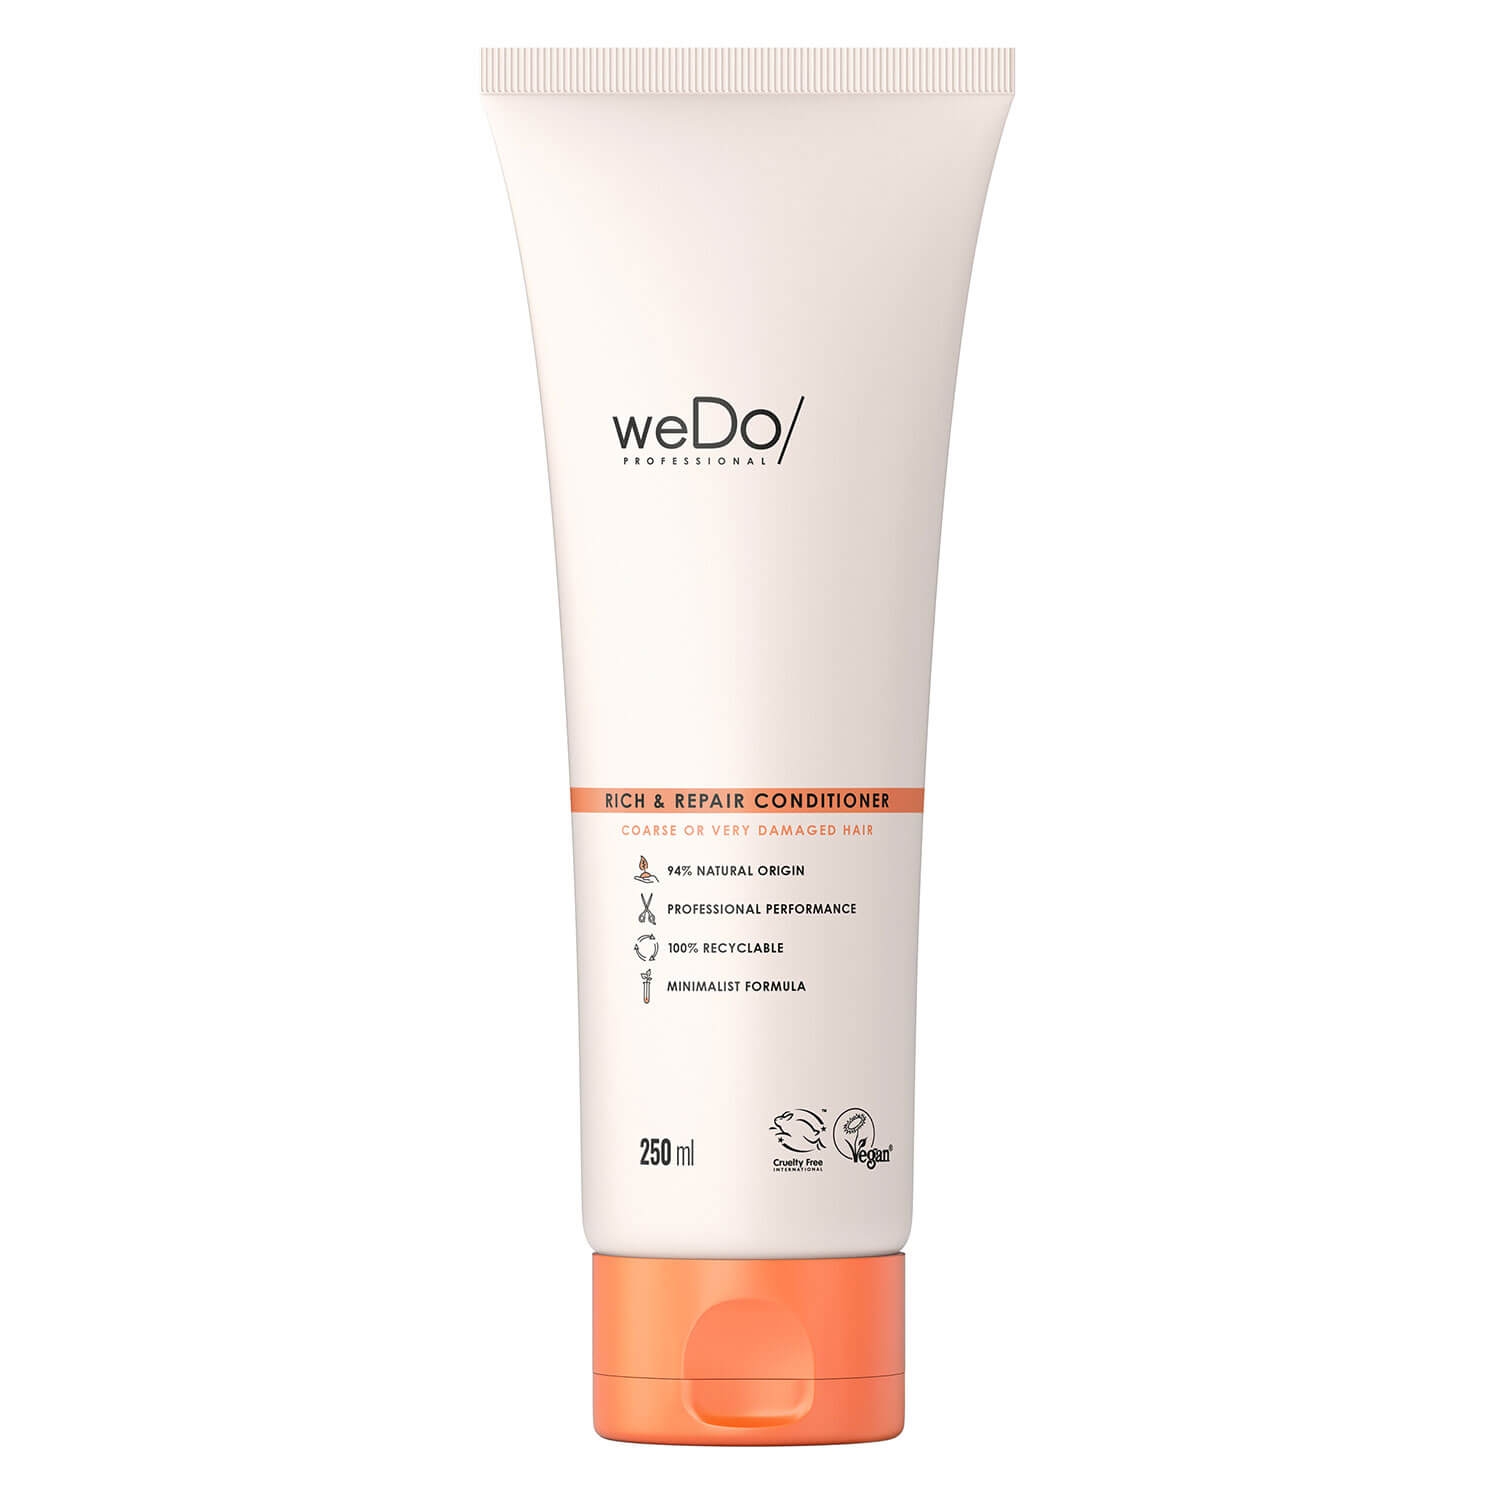 Product image from weDo/ - Rich & Repair Conditioner